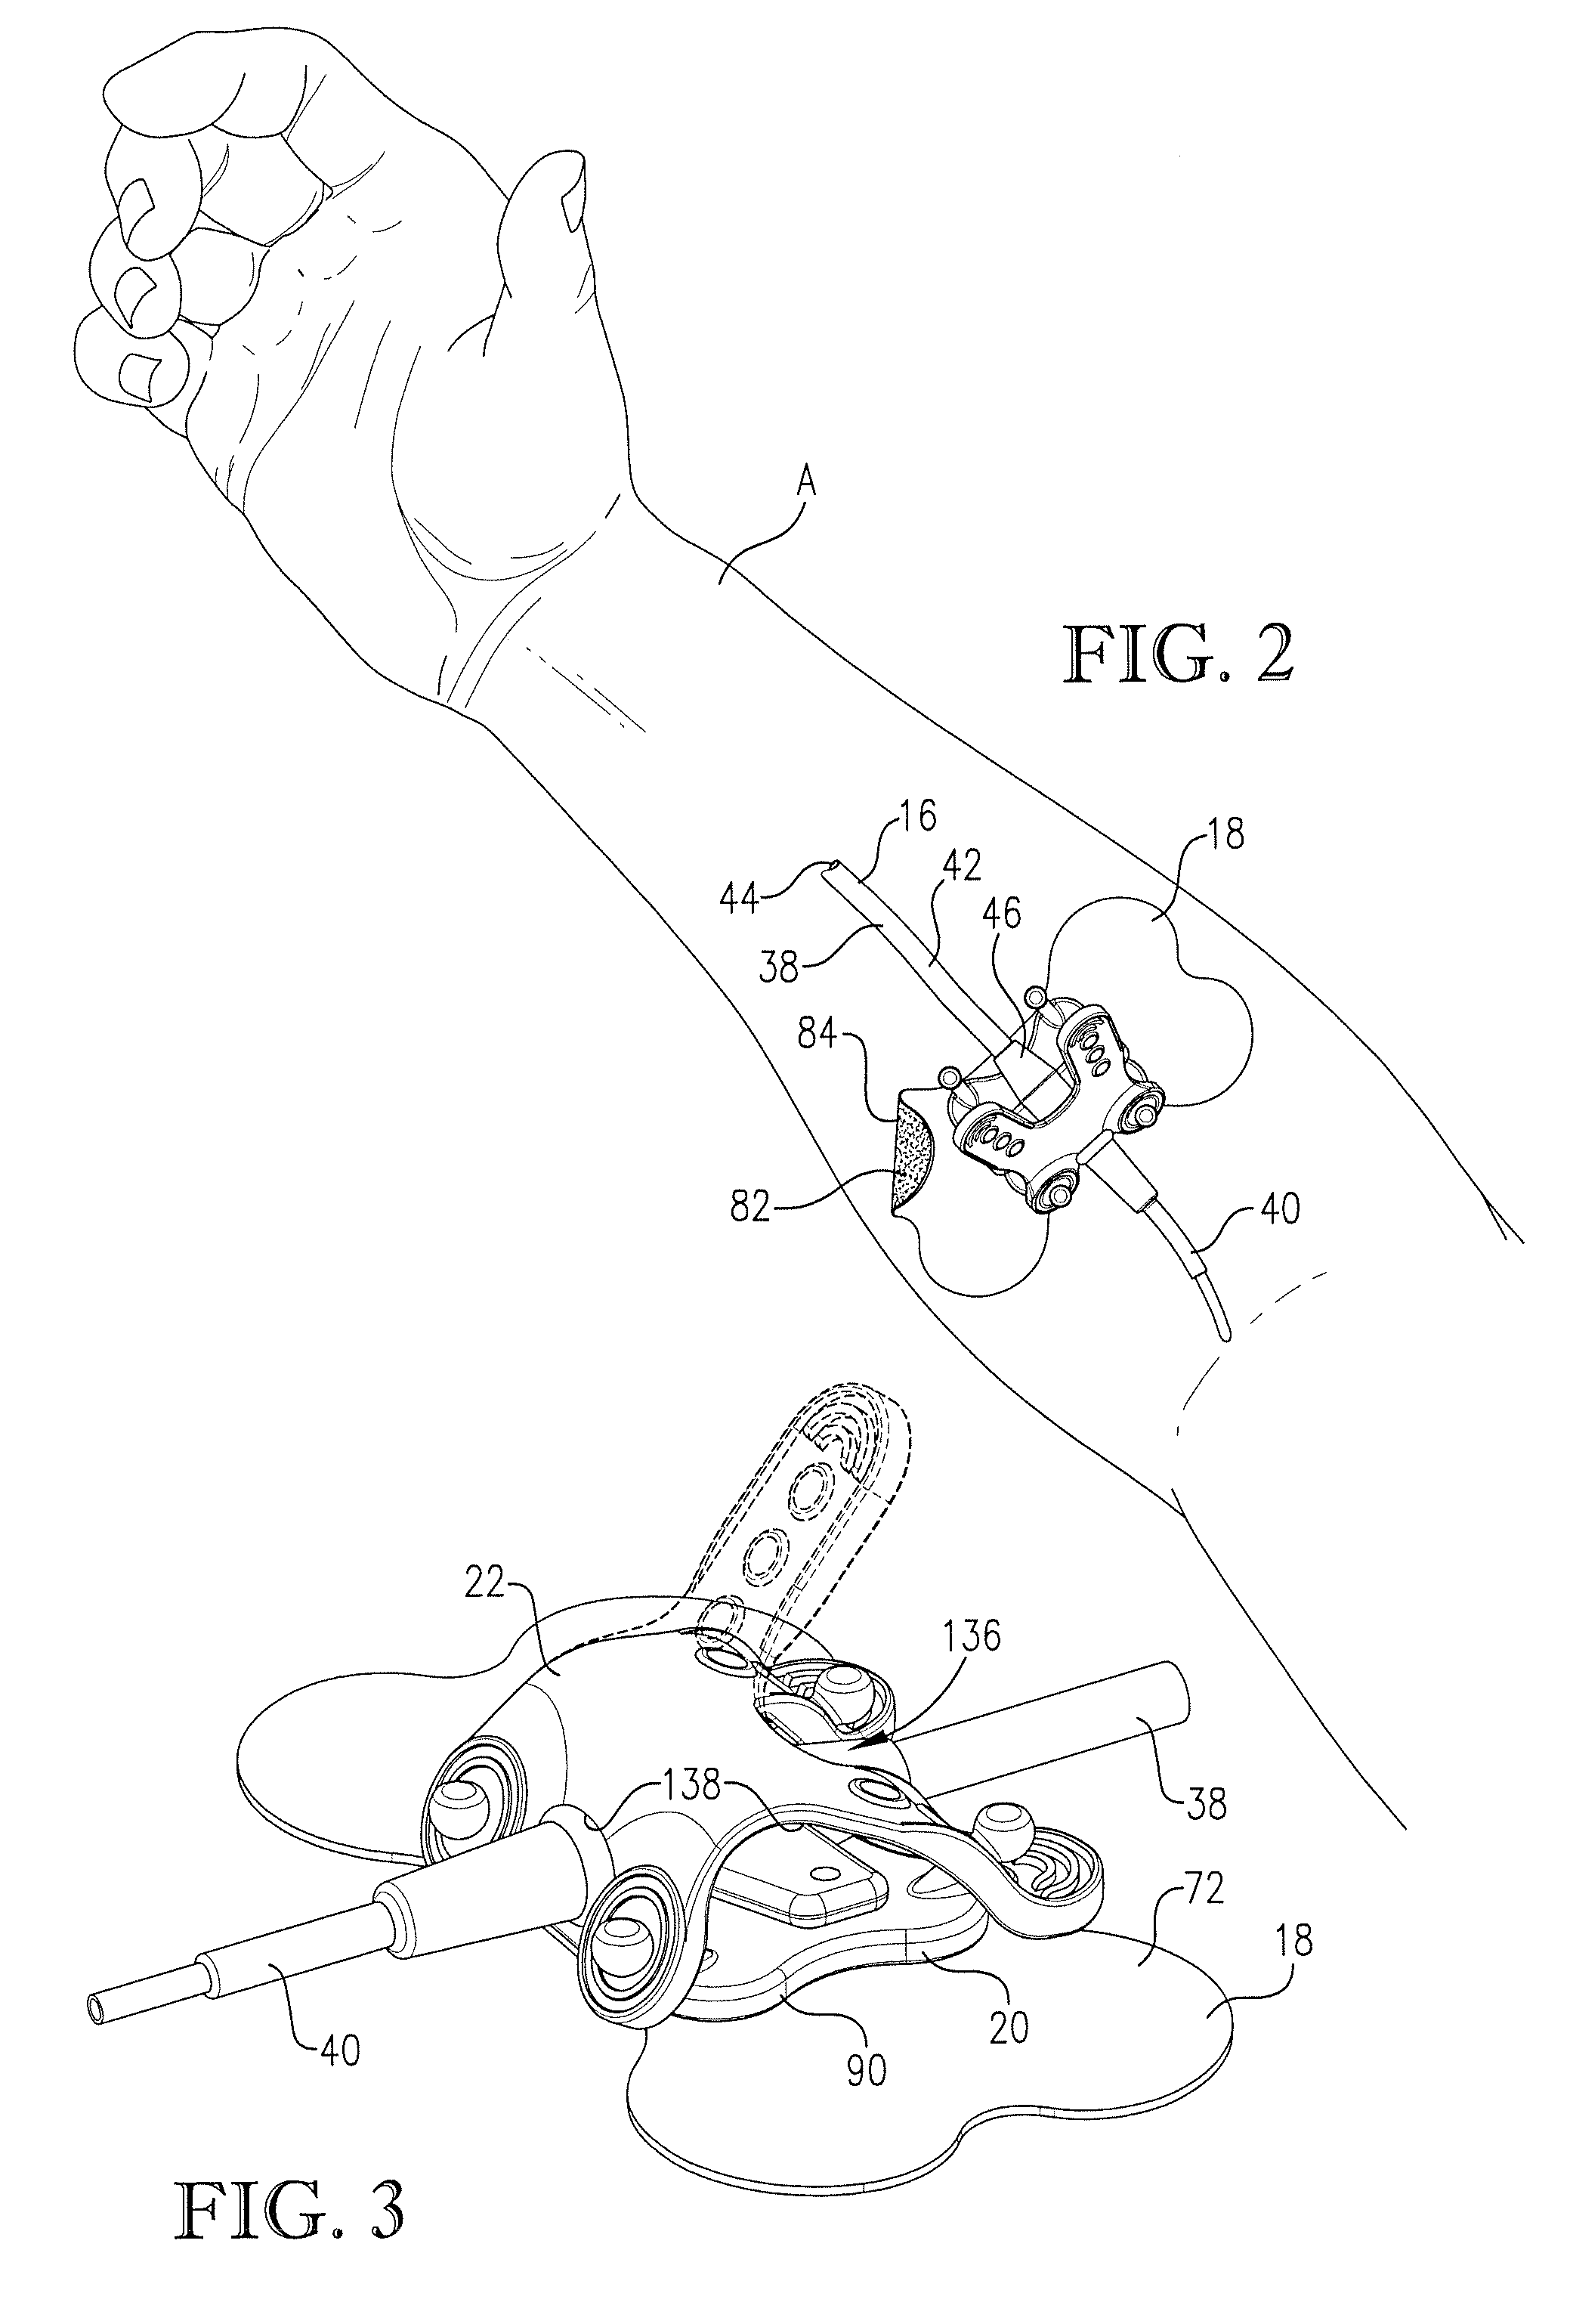 Intravenous catheter anchoring device